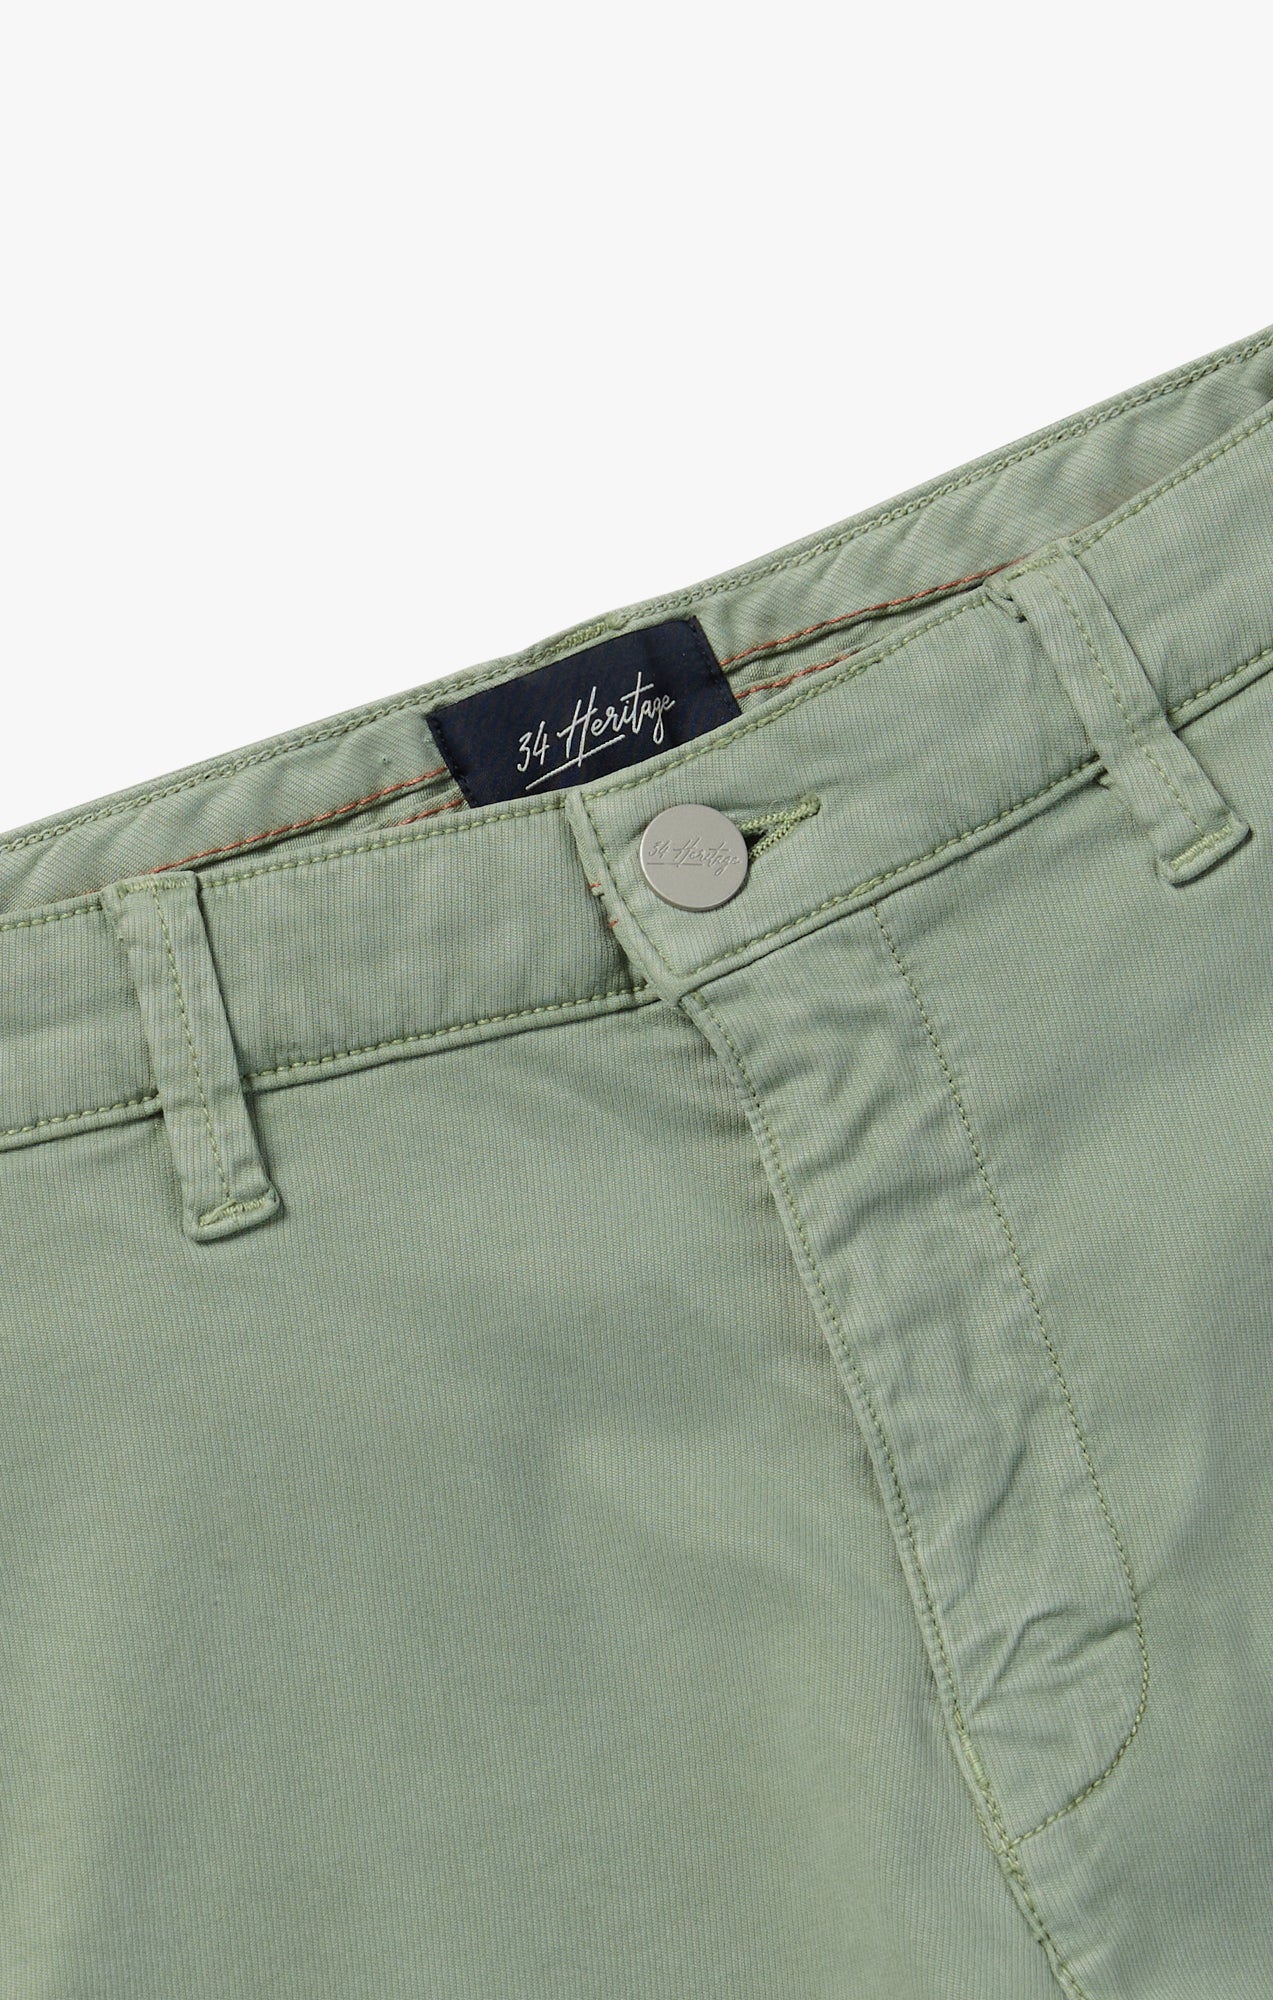 Nevada Shorts in Green Soft Touch Image 8